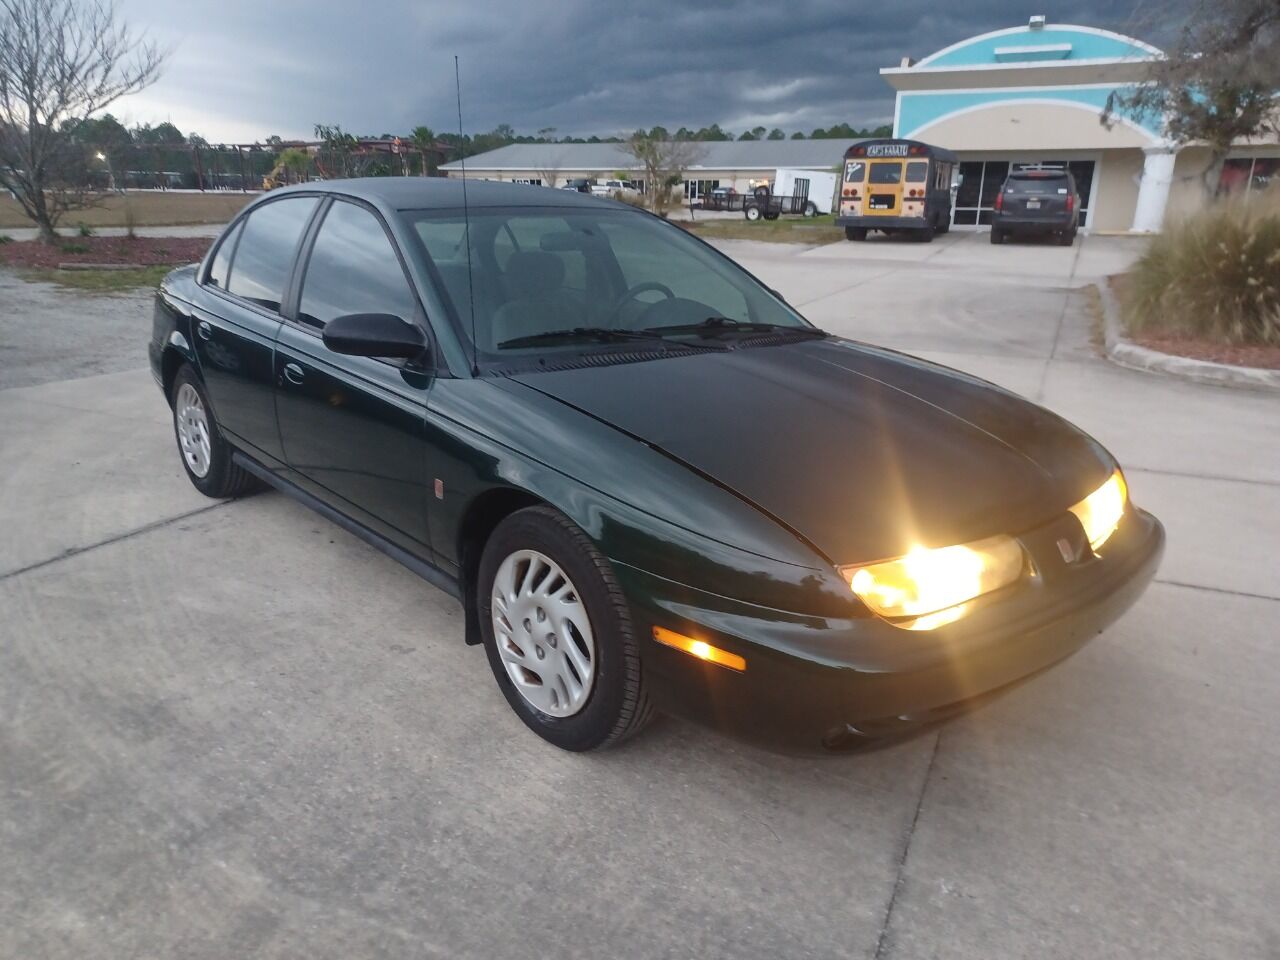 1998 Saturn S-Series For Sale - Carsforsale.com®